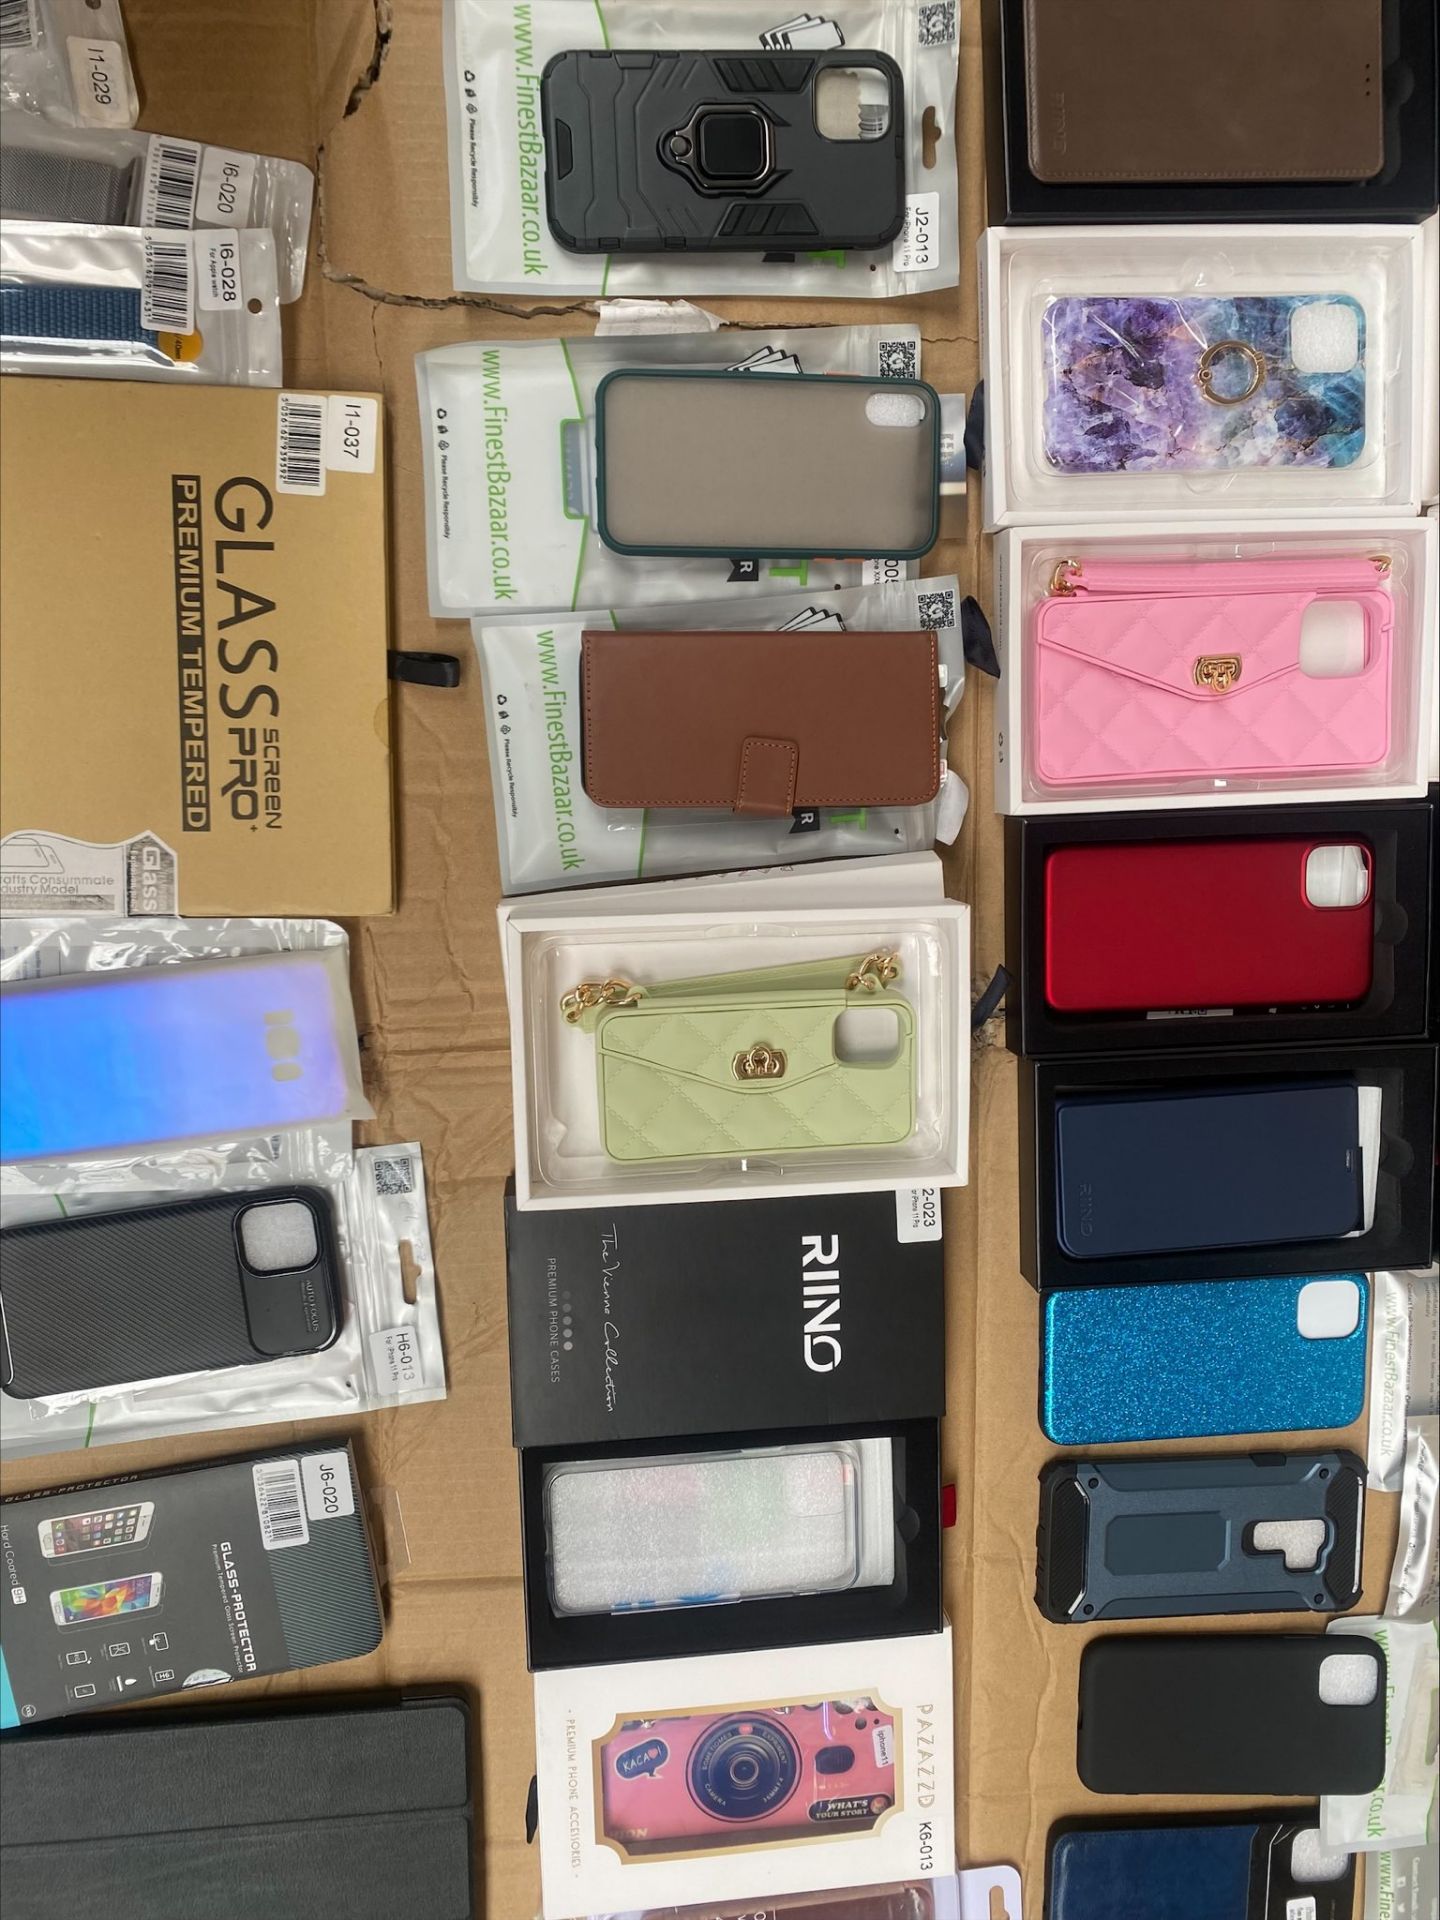 Job Lot 5K Units iPhone, Samsung, Air Pod, Apple Watch, Charging Cables, Phone Cover Accessories - Image 20 of 20